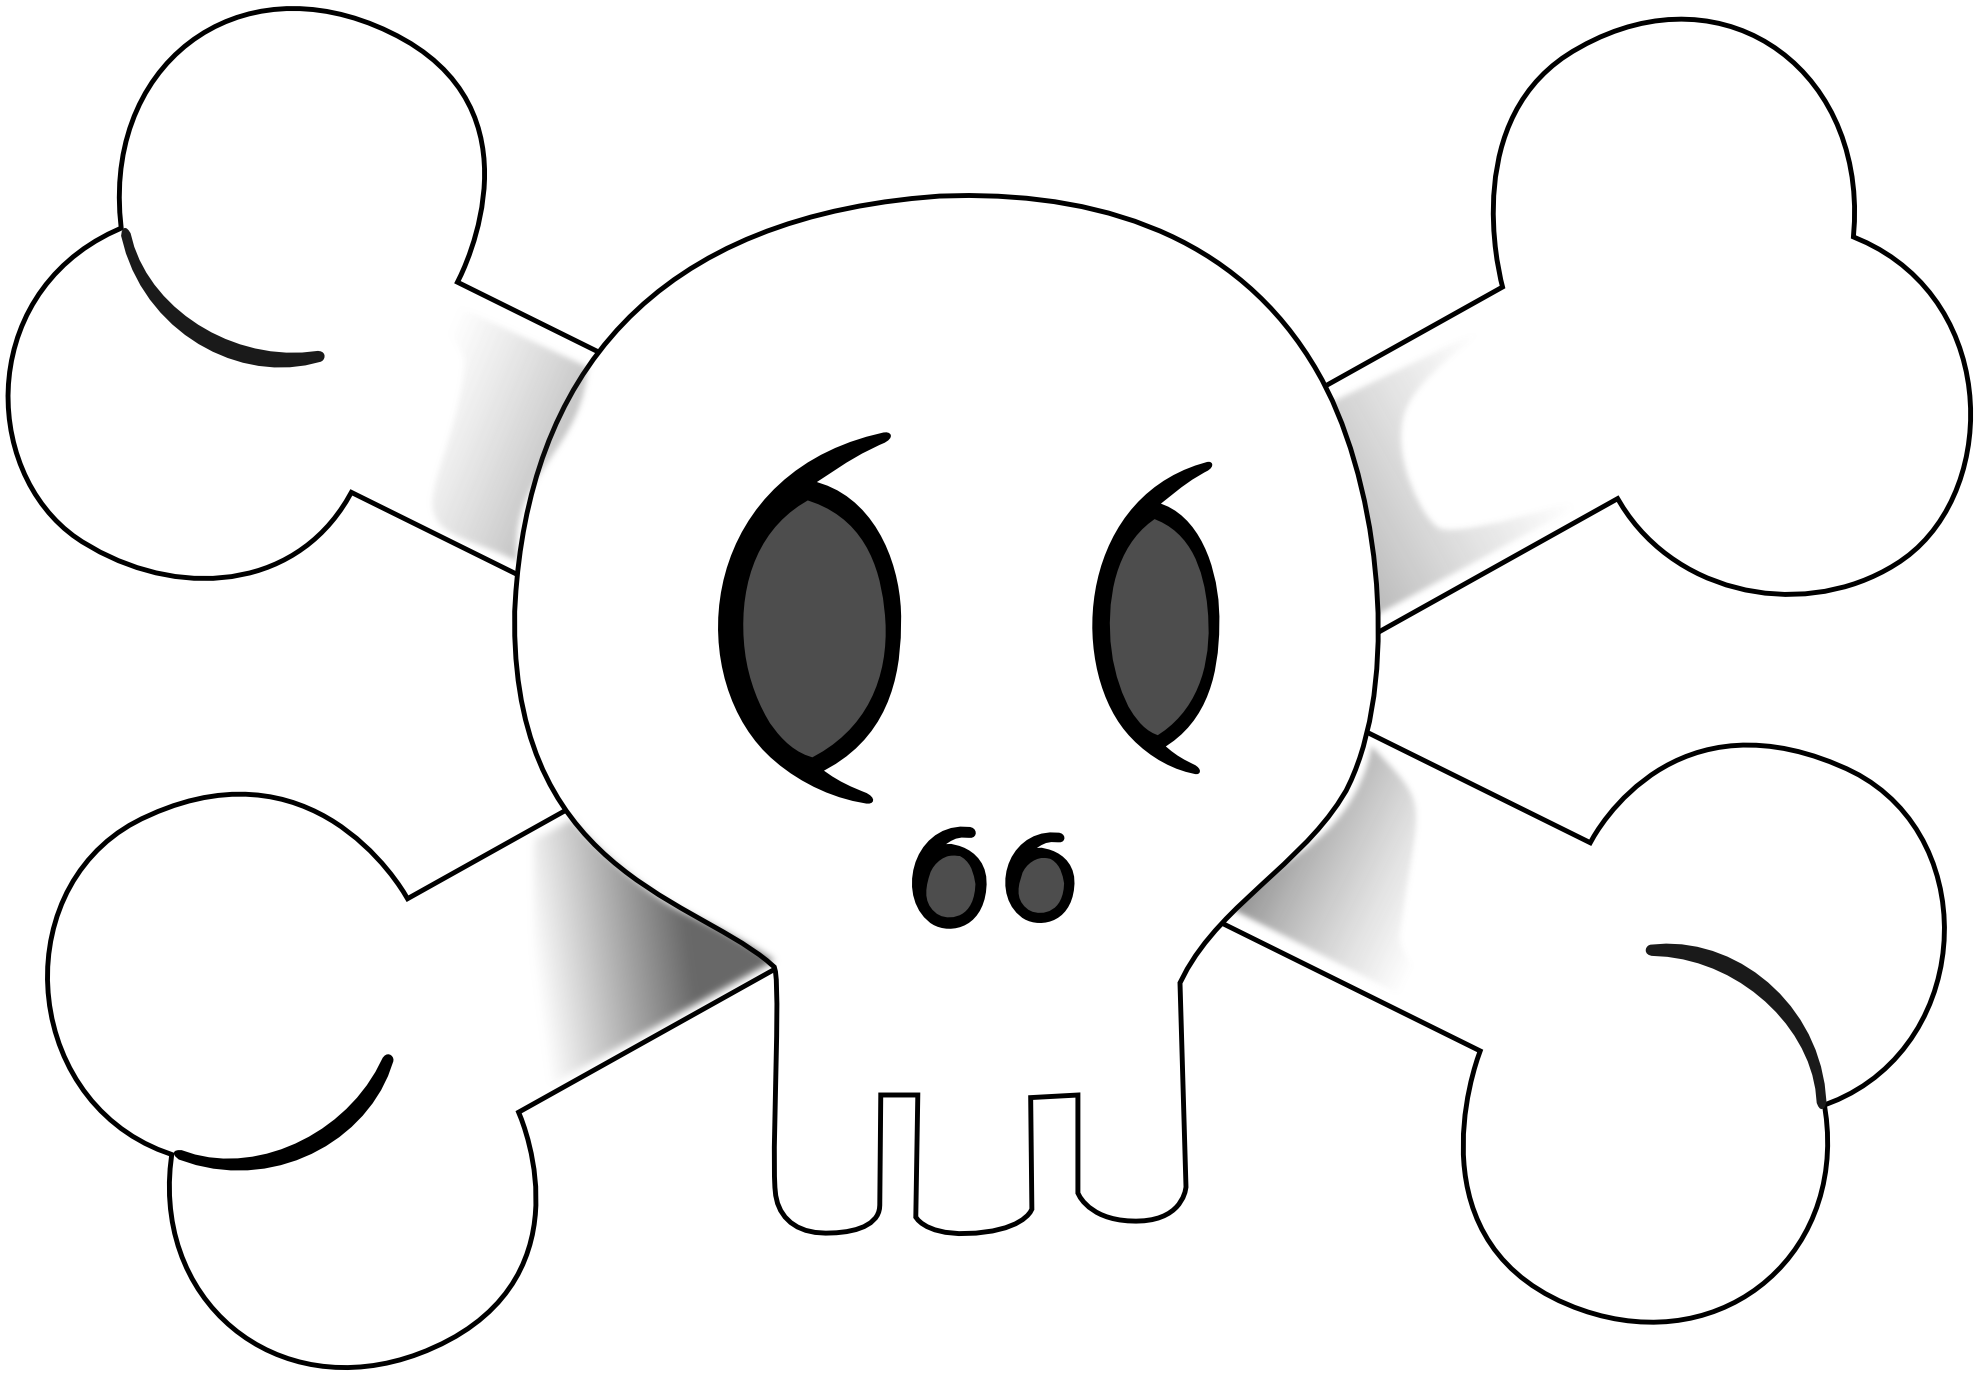 free-pirate-flag-clipart-download-free-pirate-flag-clipart-png-images-free-cliparts-on-clipart